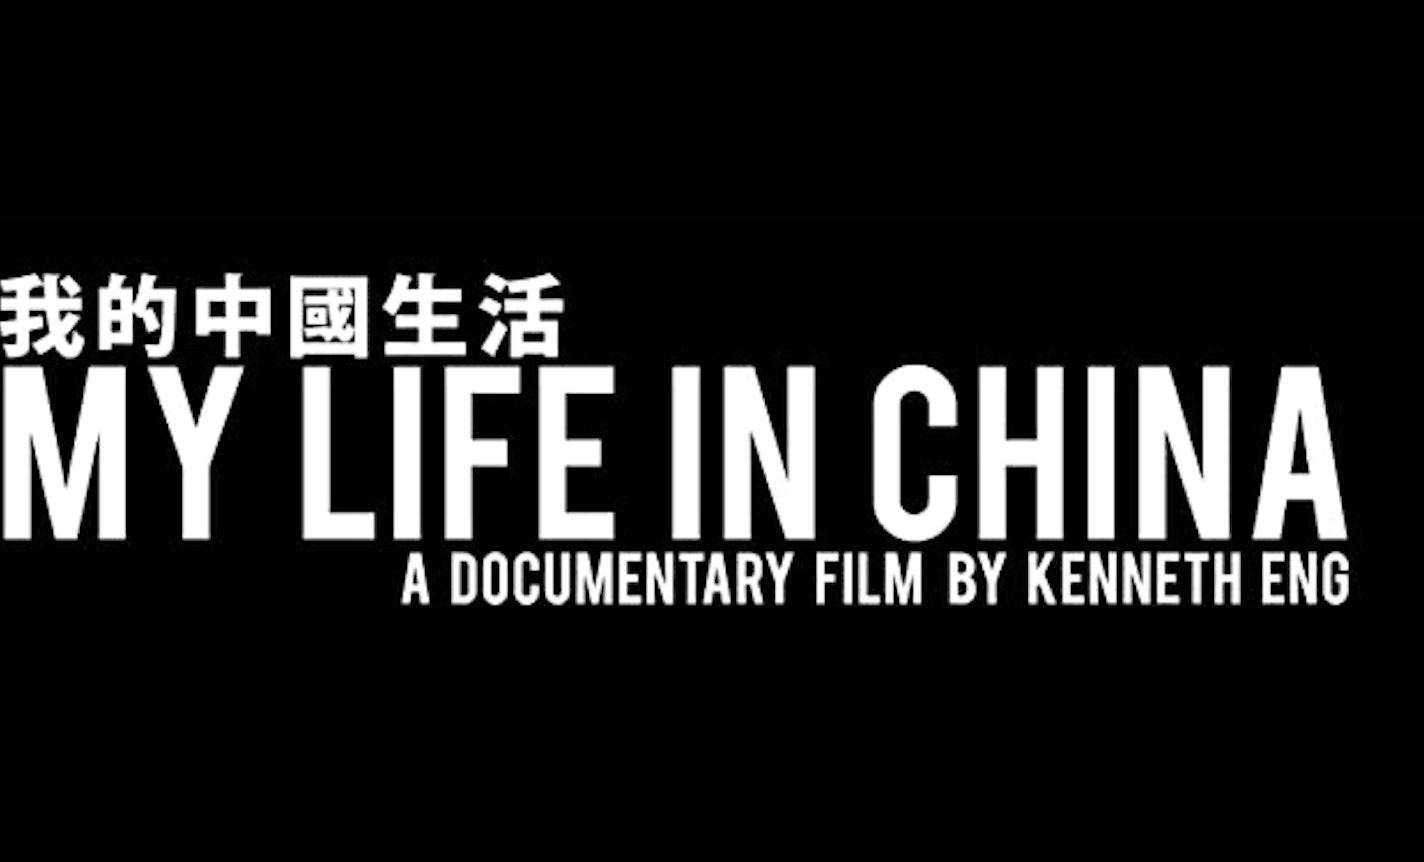 Death Over Dim Sum (and a son's film)